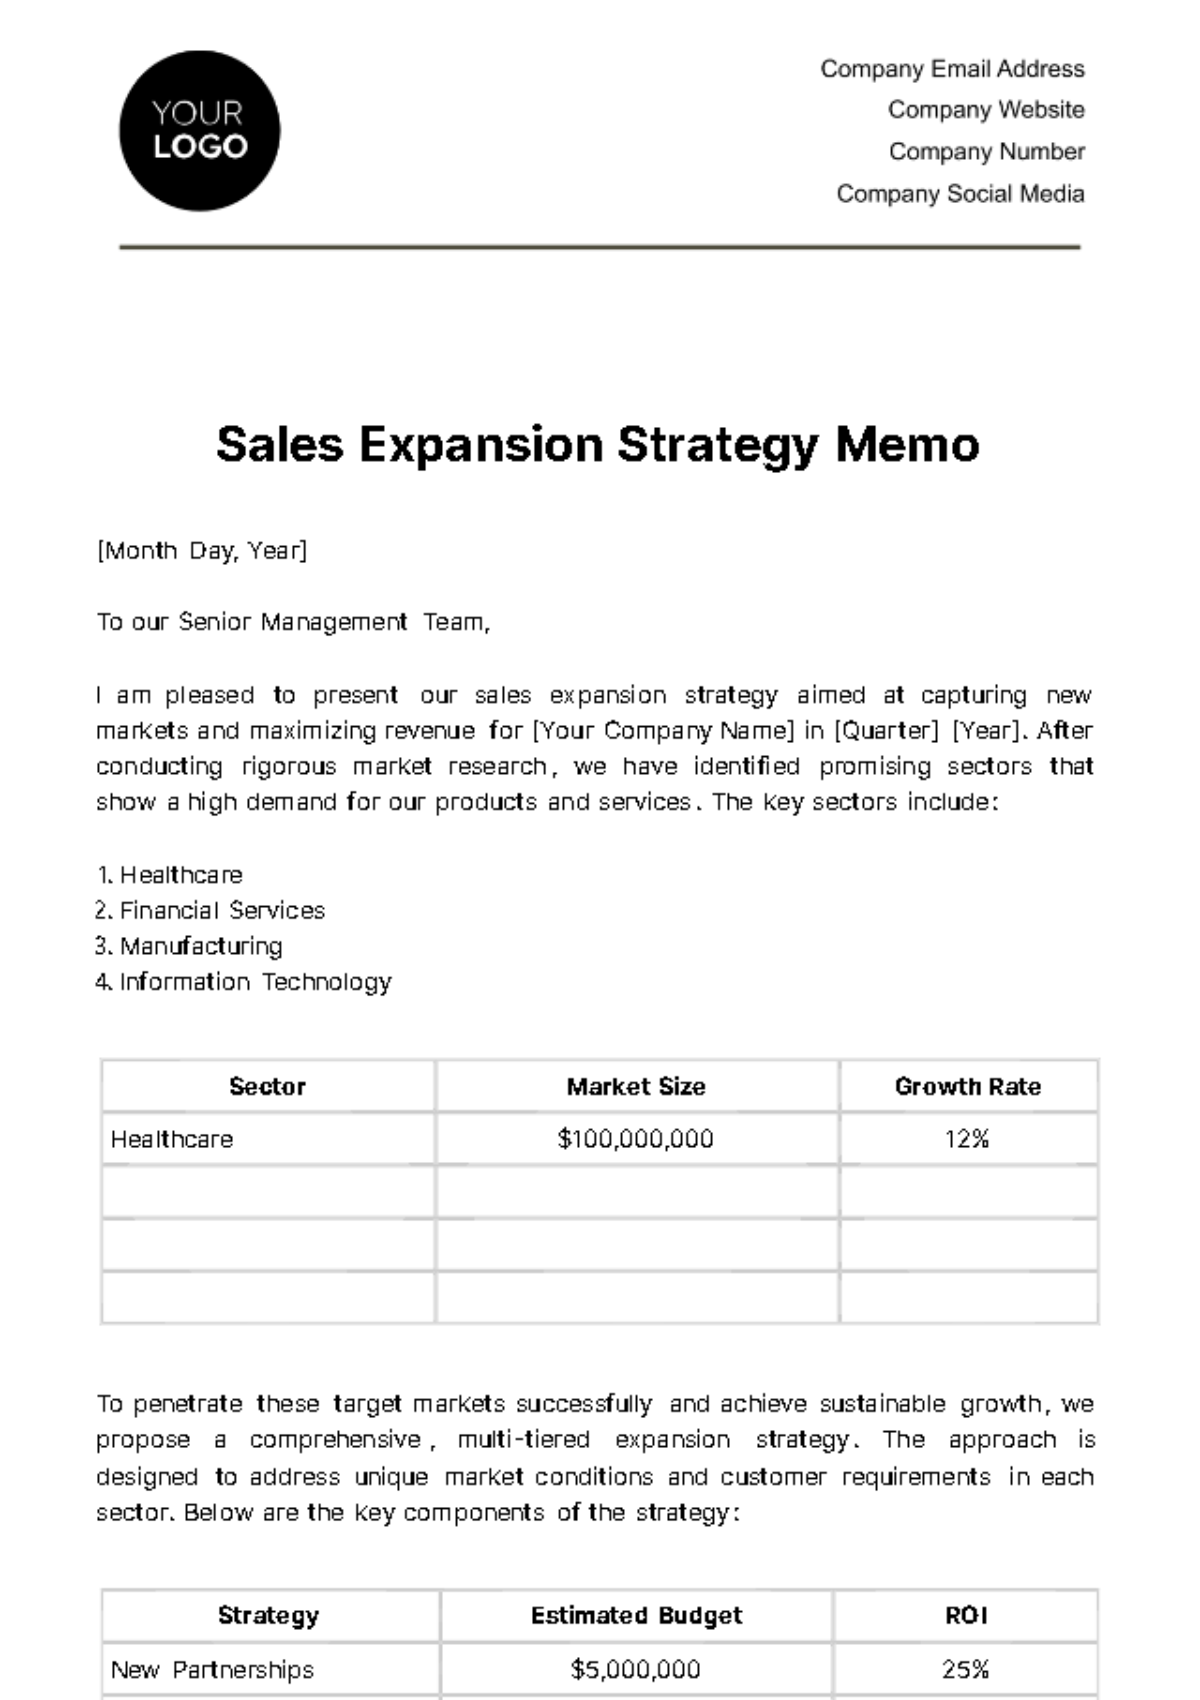 Free Sales Expansion Strategy Memo Template